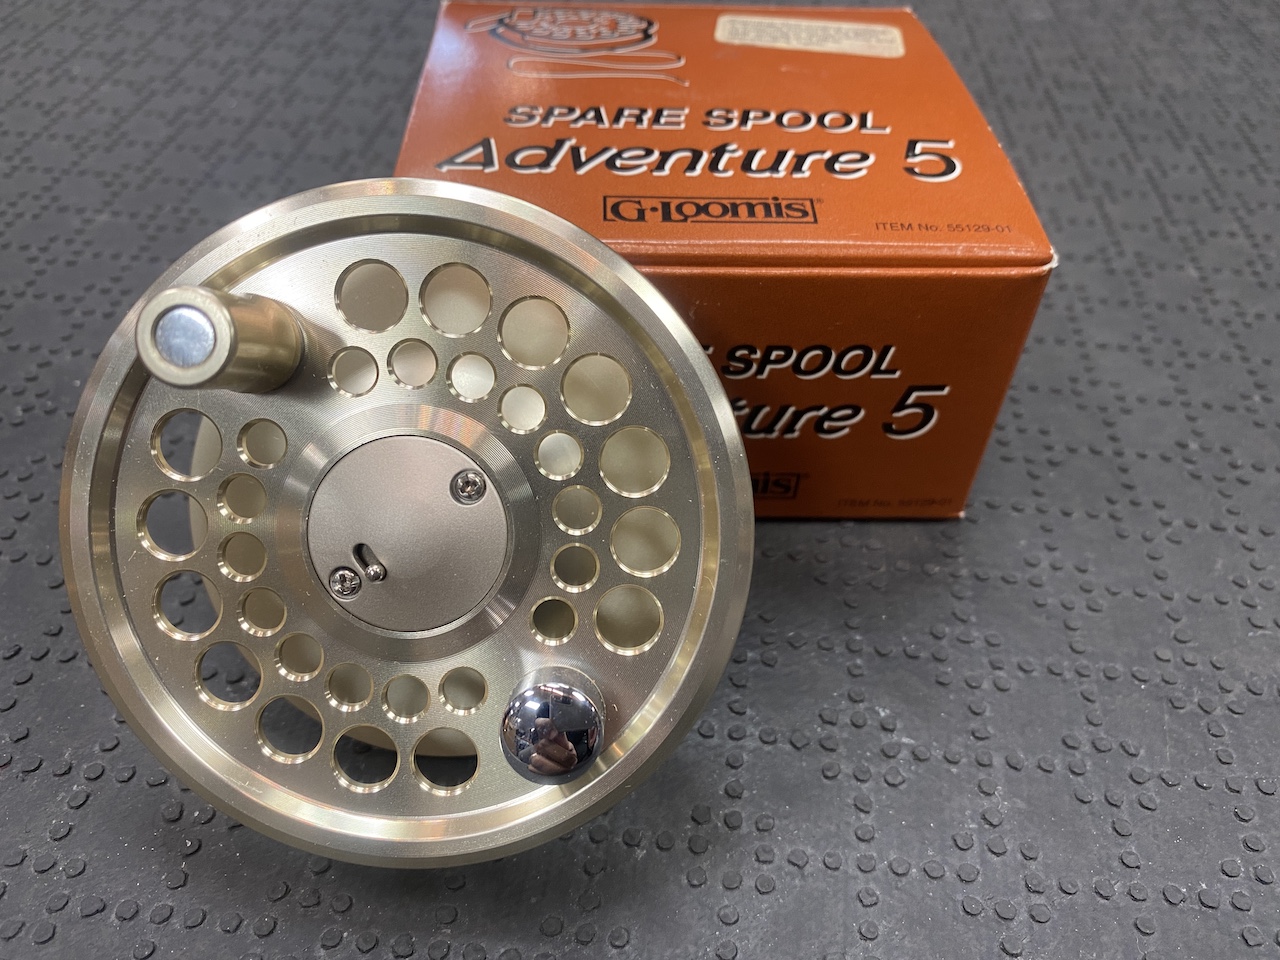 Fishing reel Johnson 710B w box & 710A for parts - sporting goods